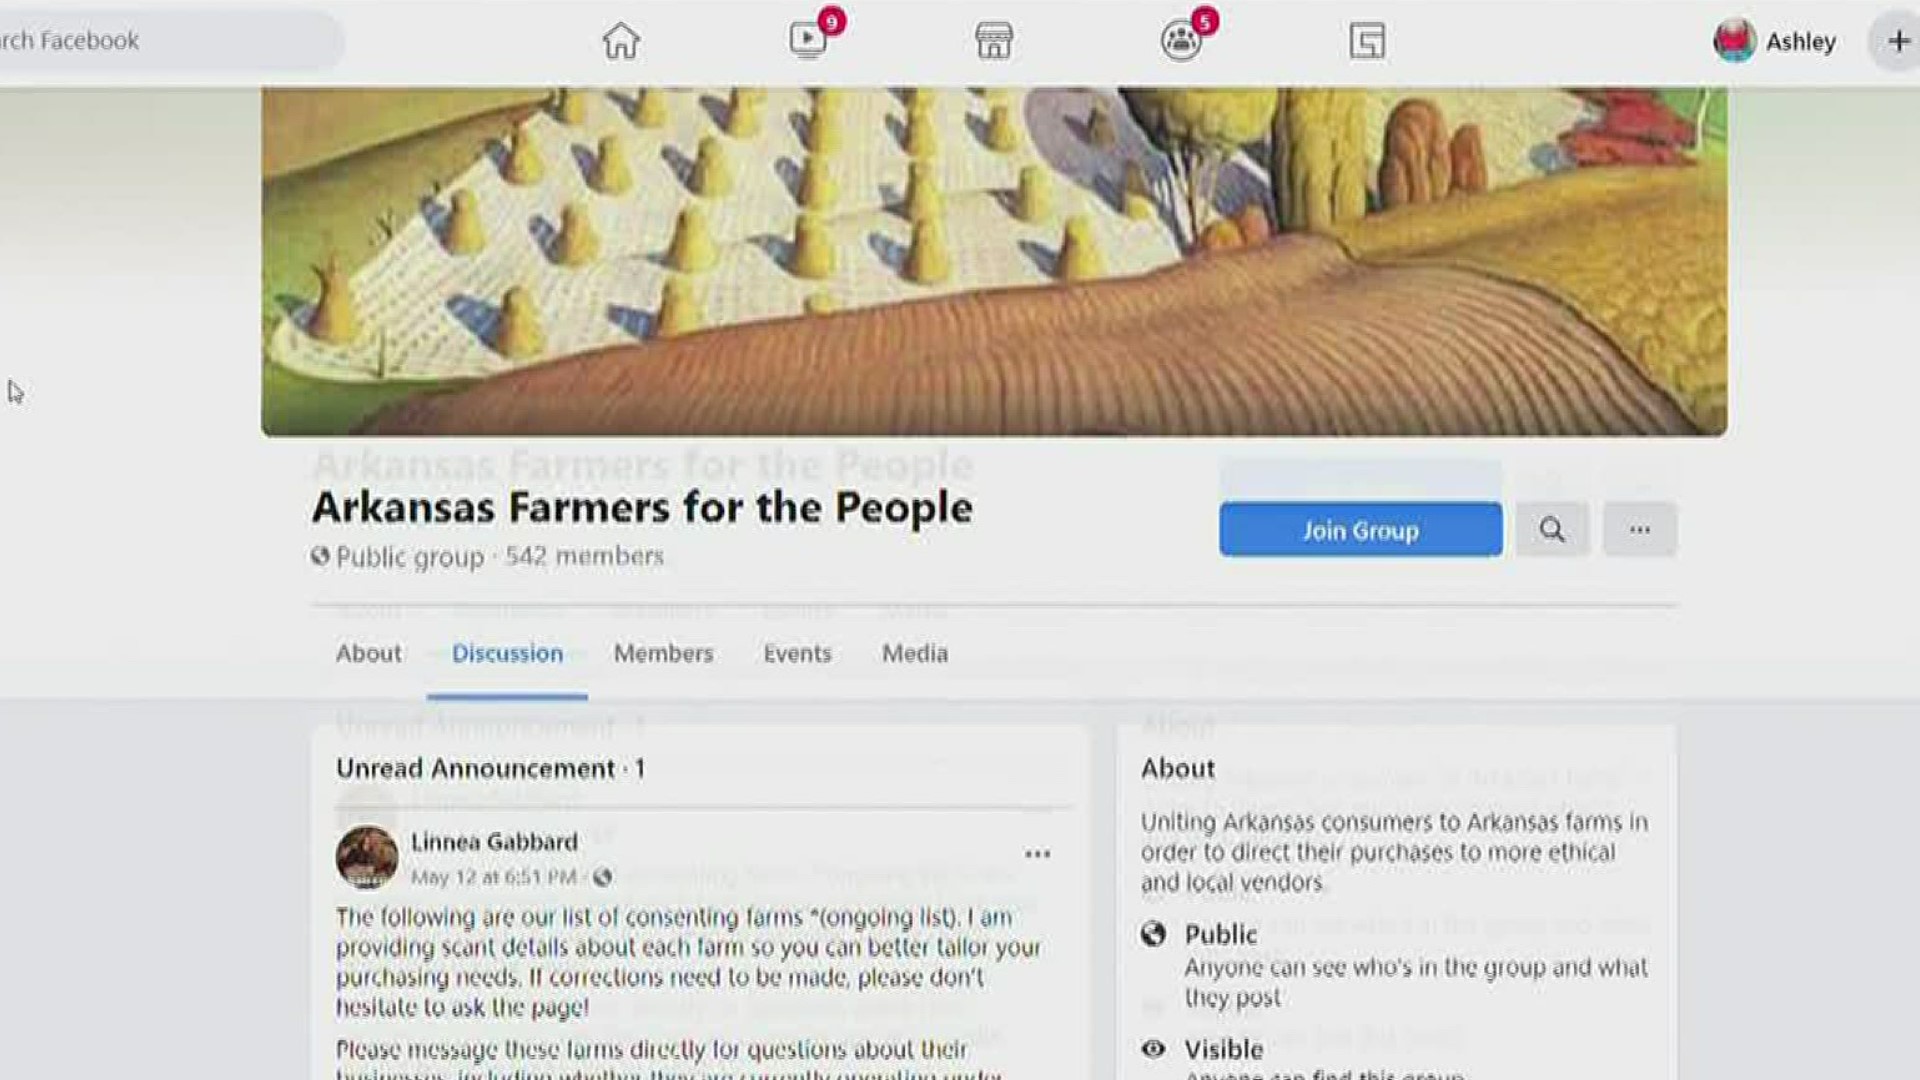 "Arkansas Farmers for the People" has only been up one week and has more than 500 members and 12 farmers from all across the state.